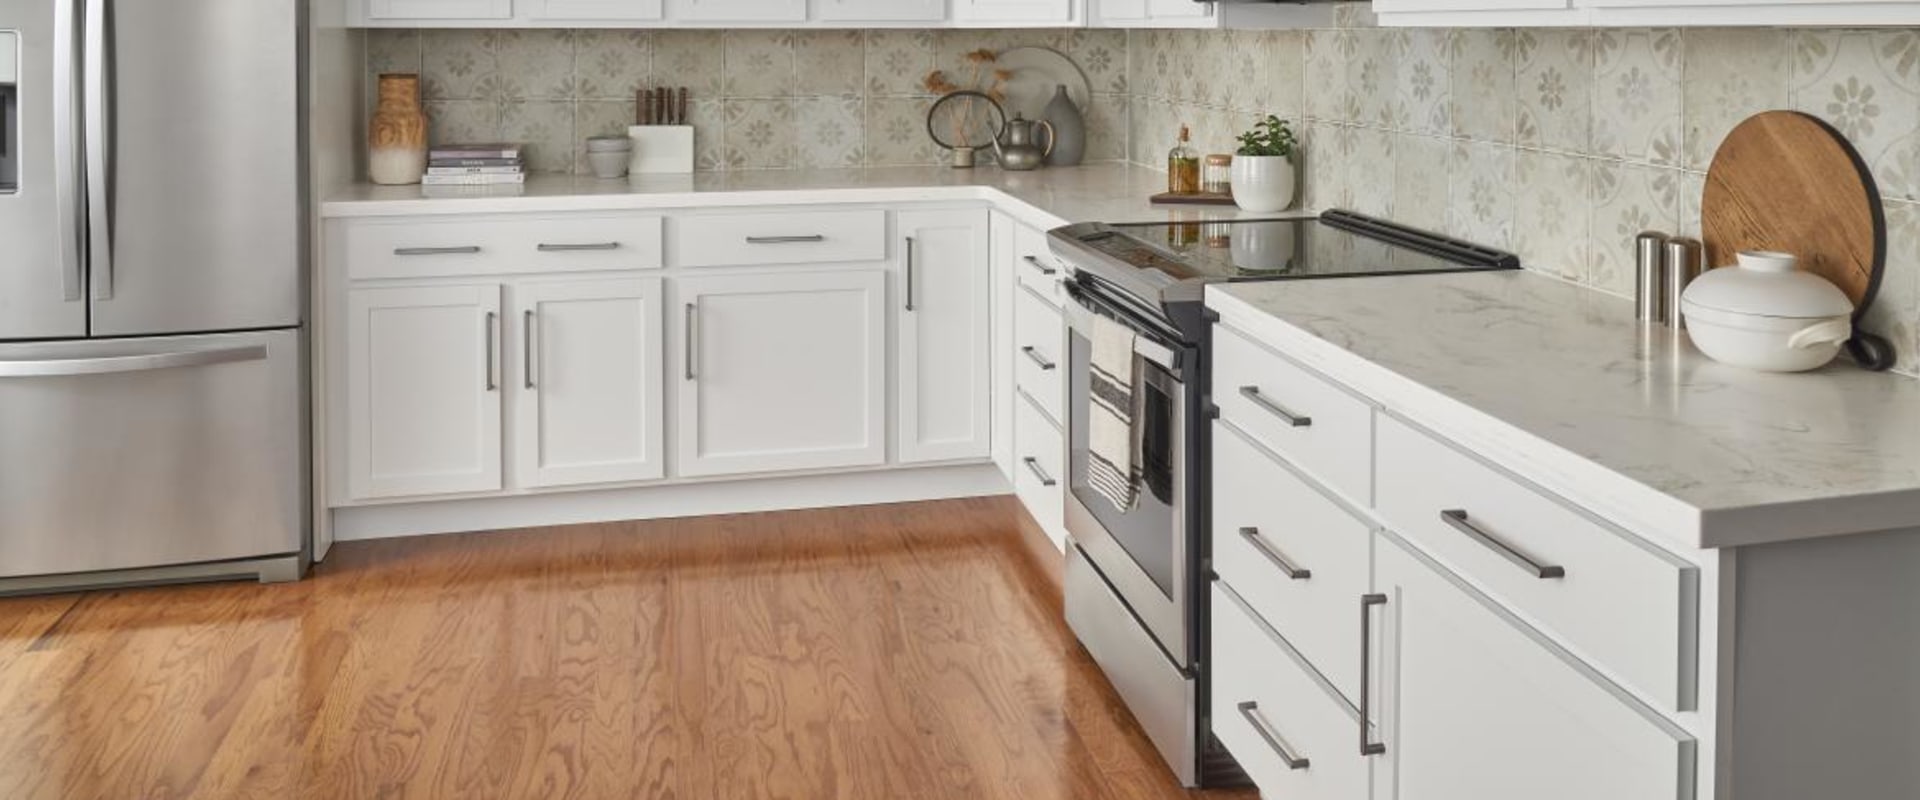 What Color Kitchen Hardware is Trending Nowadays?